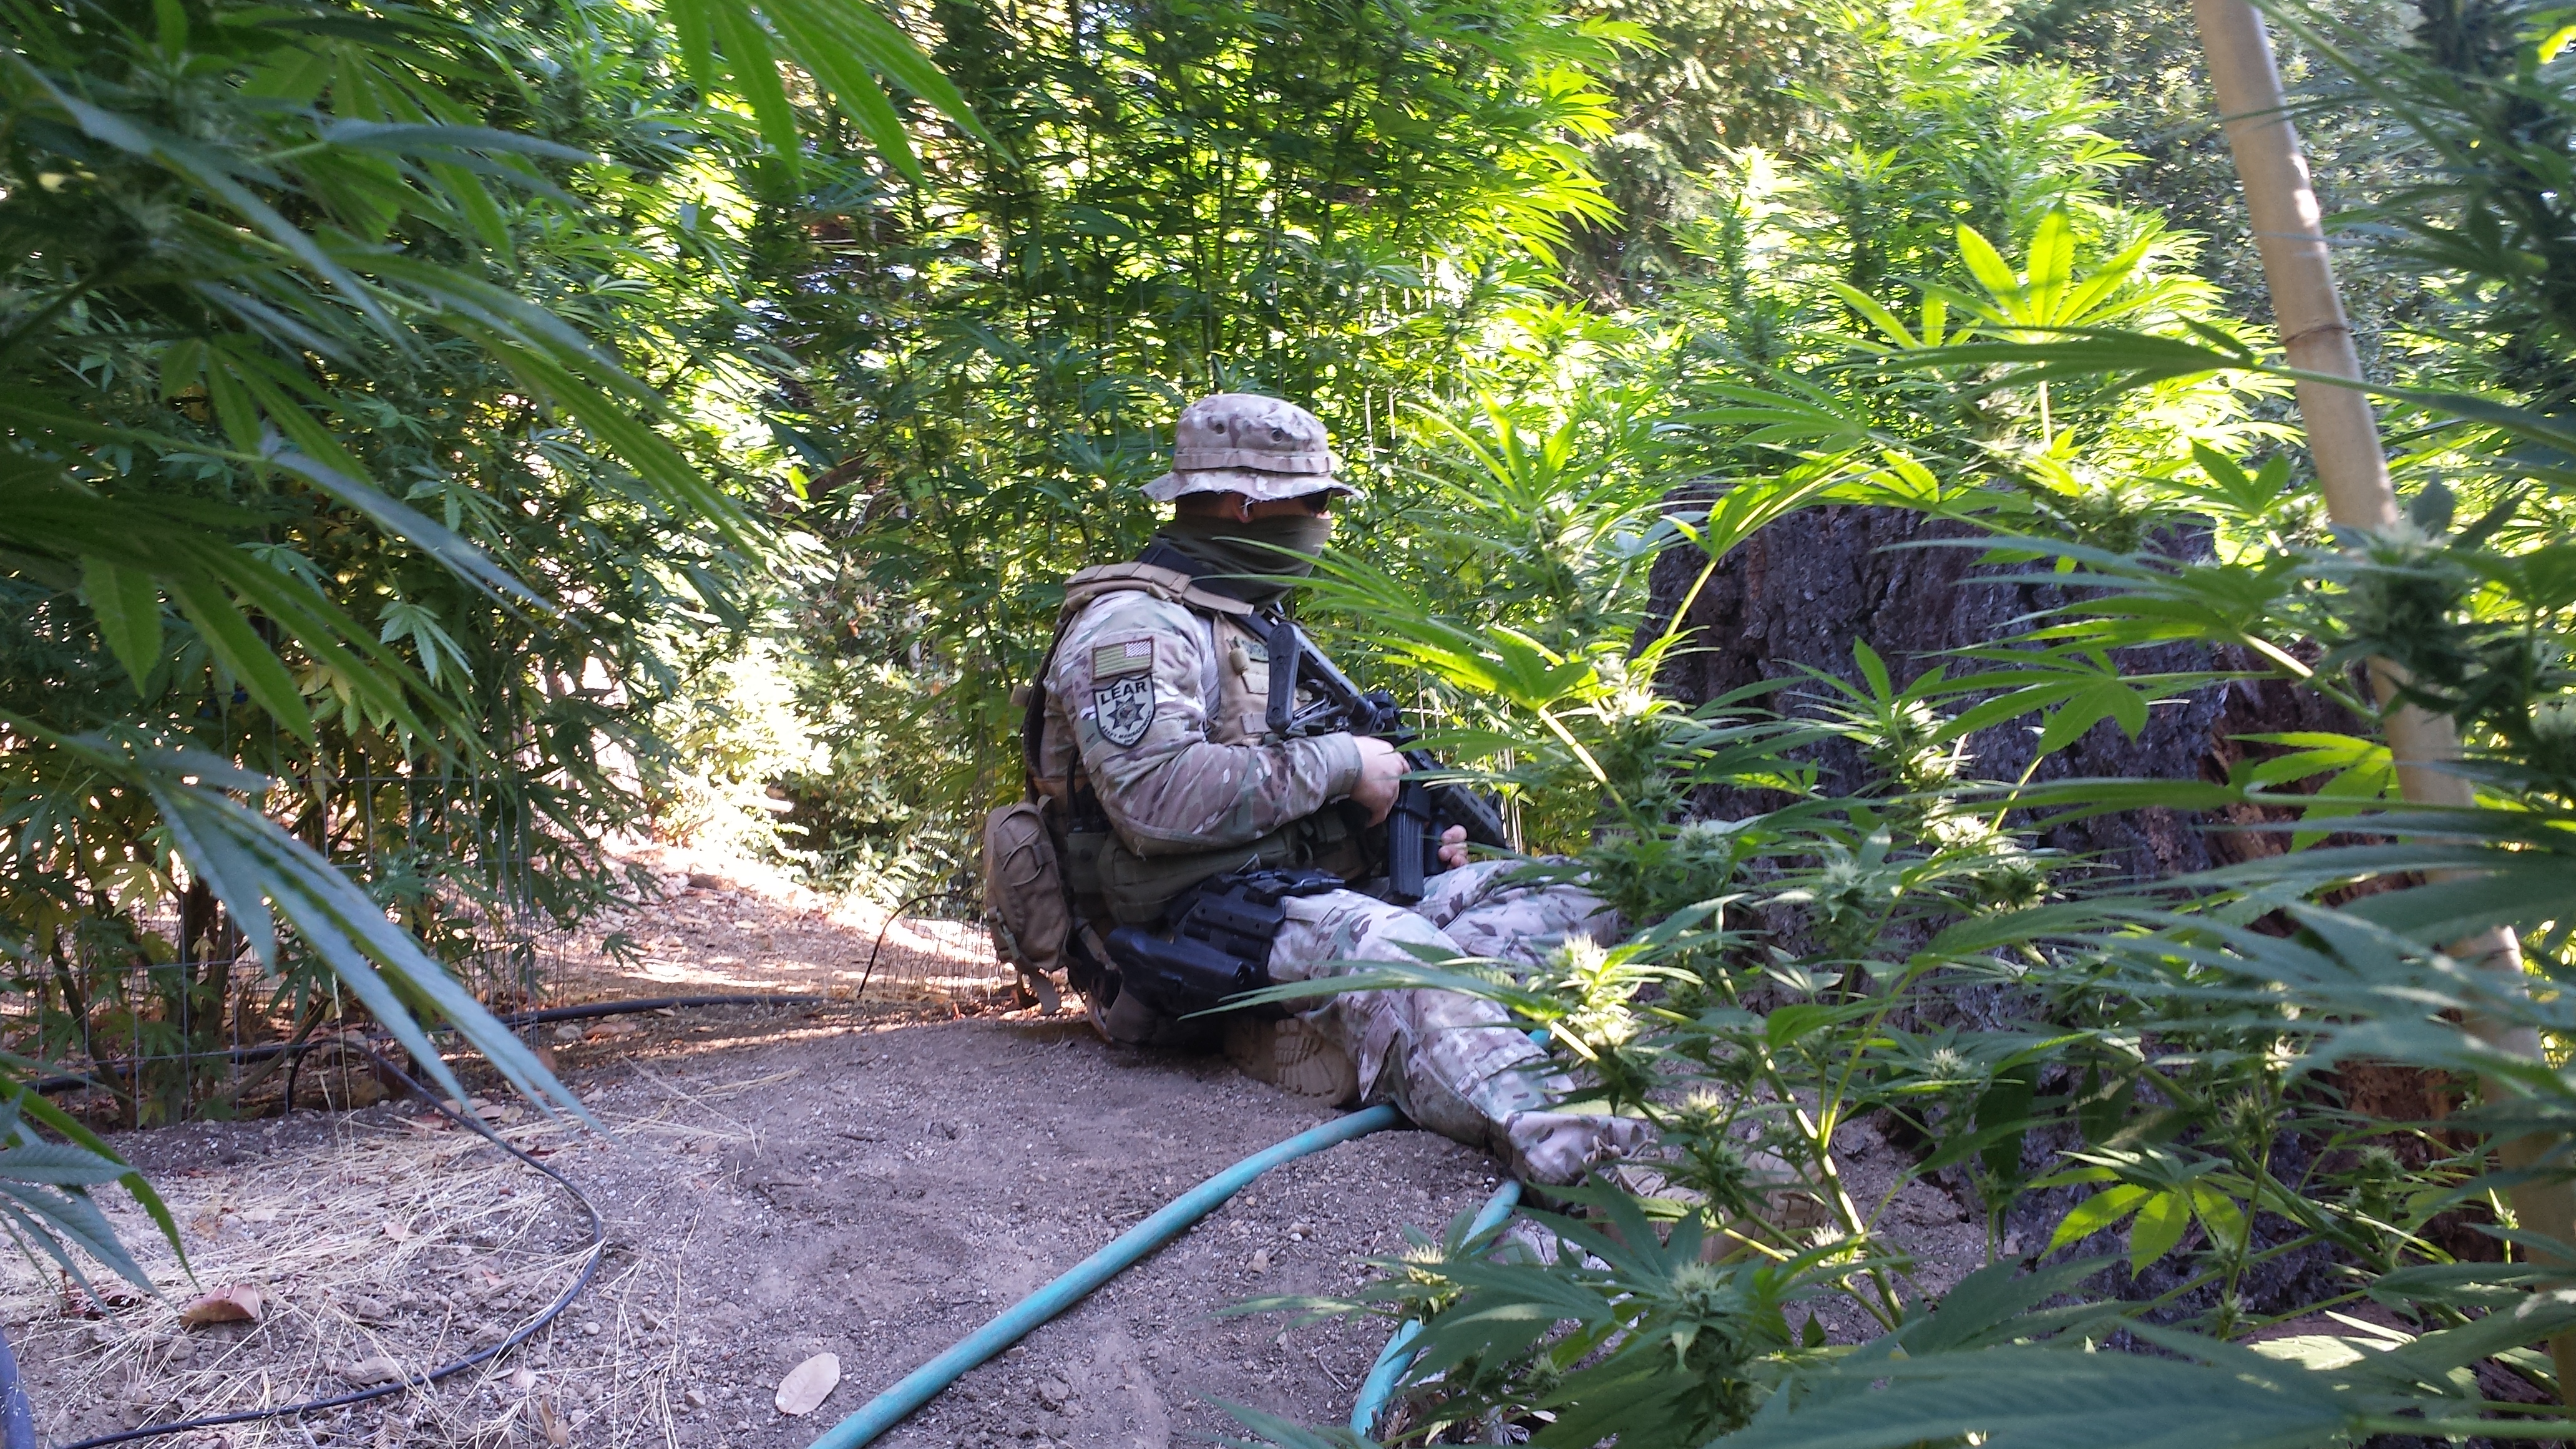 Lear personnel during a raid on an illegal trespassing marijuana operation. (Lear)